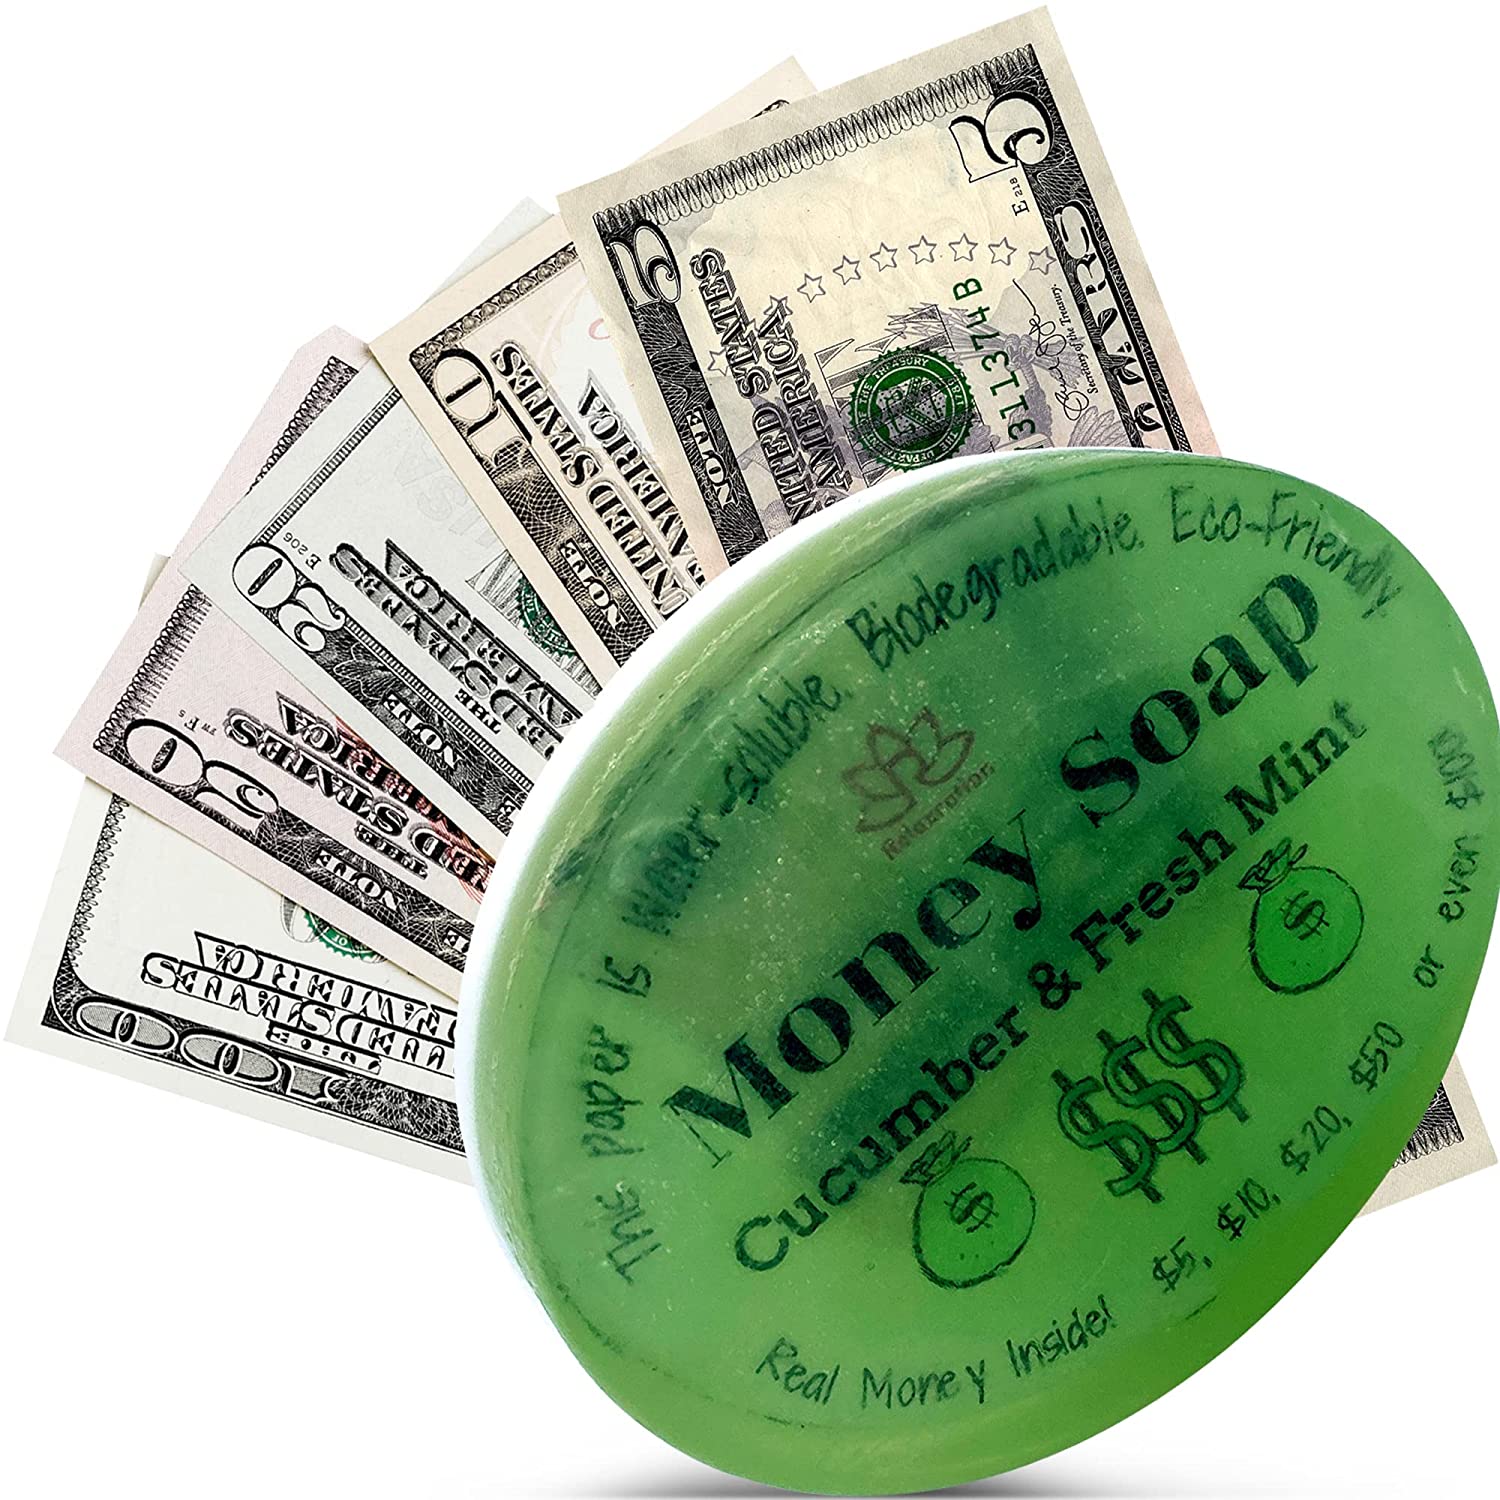 Giant Golden Billionaire Money Soap Up to $1000 In Each At Least $20 I –  The Money Soap